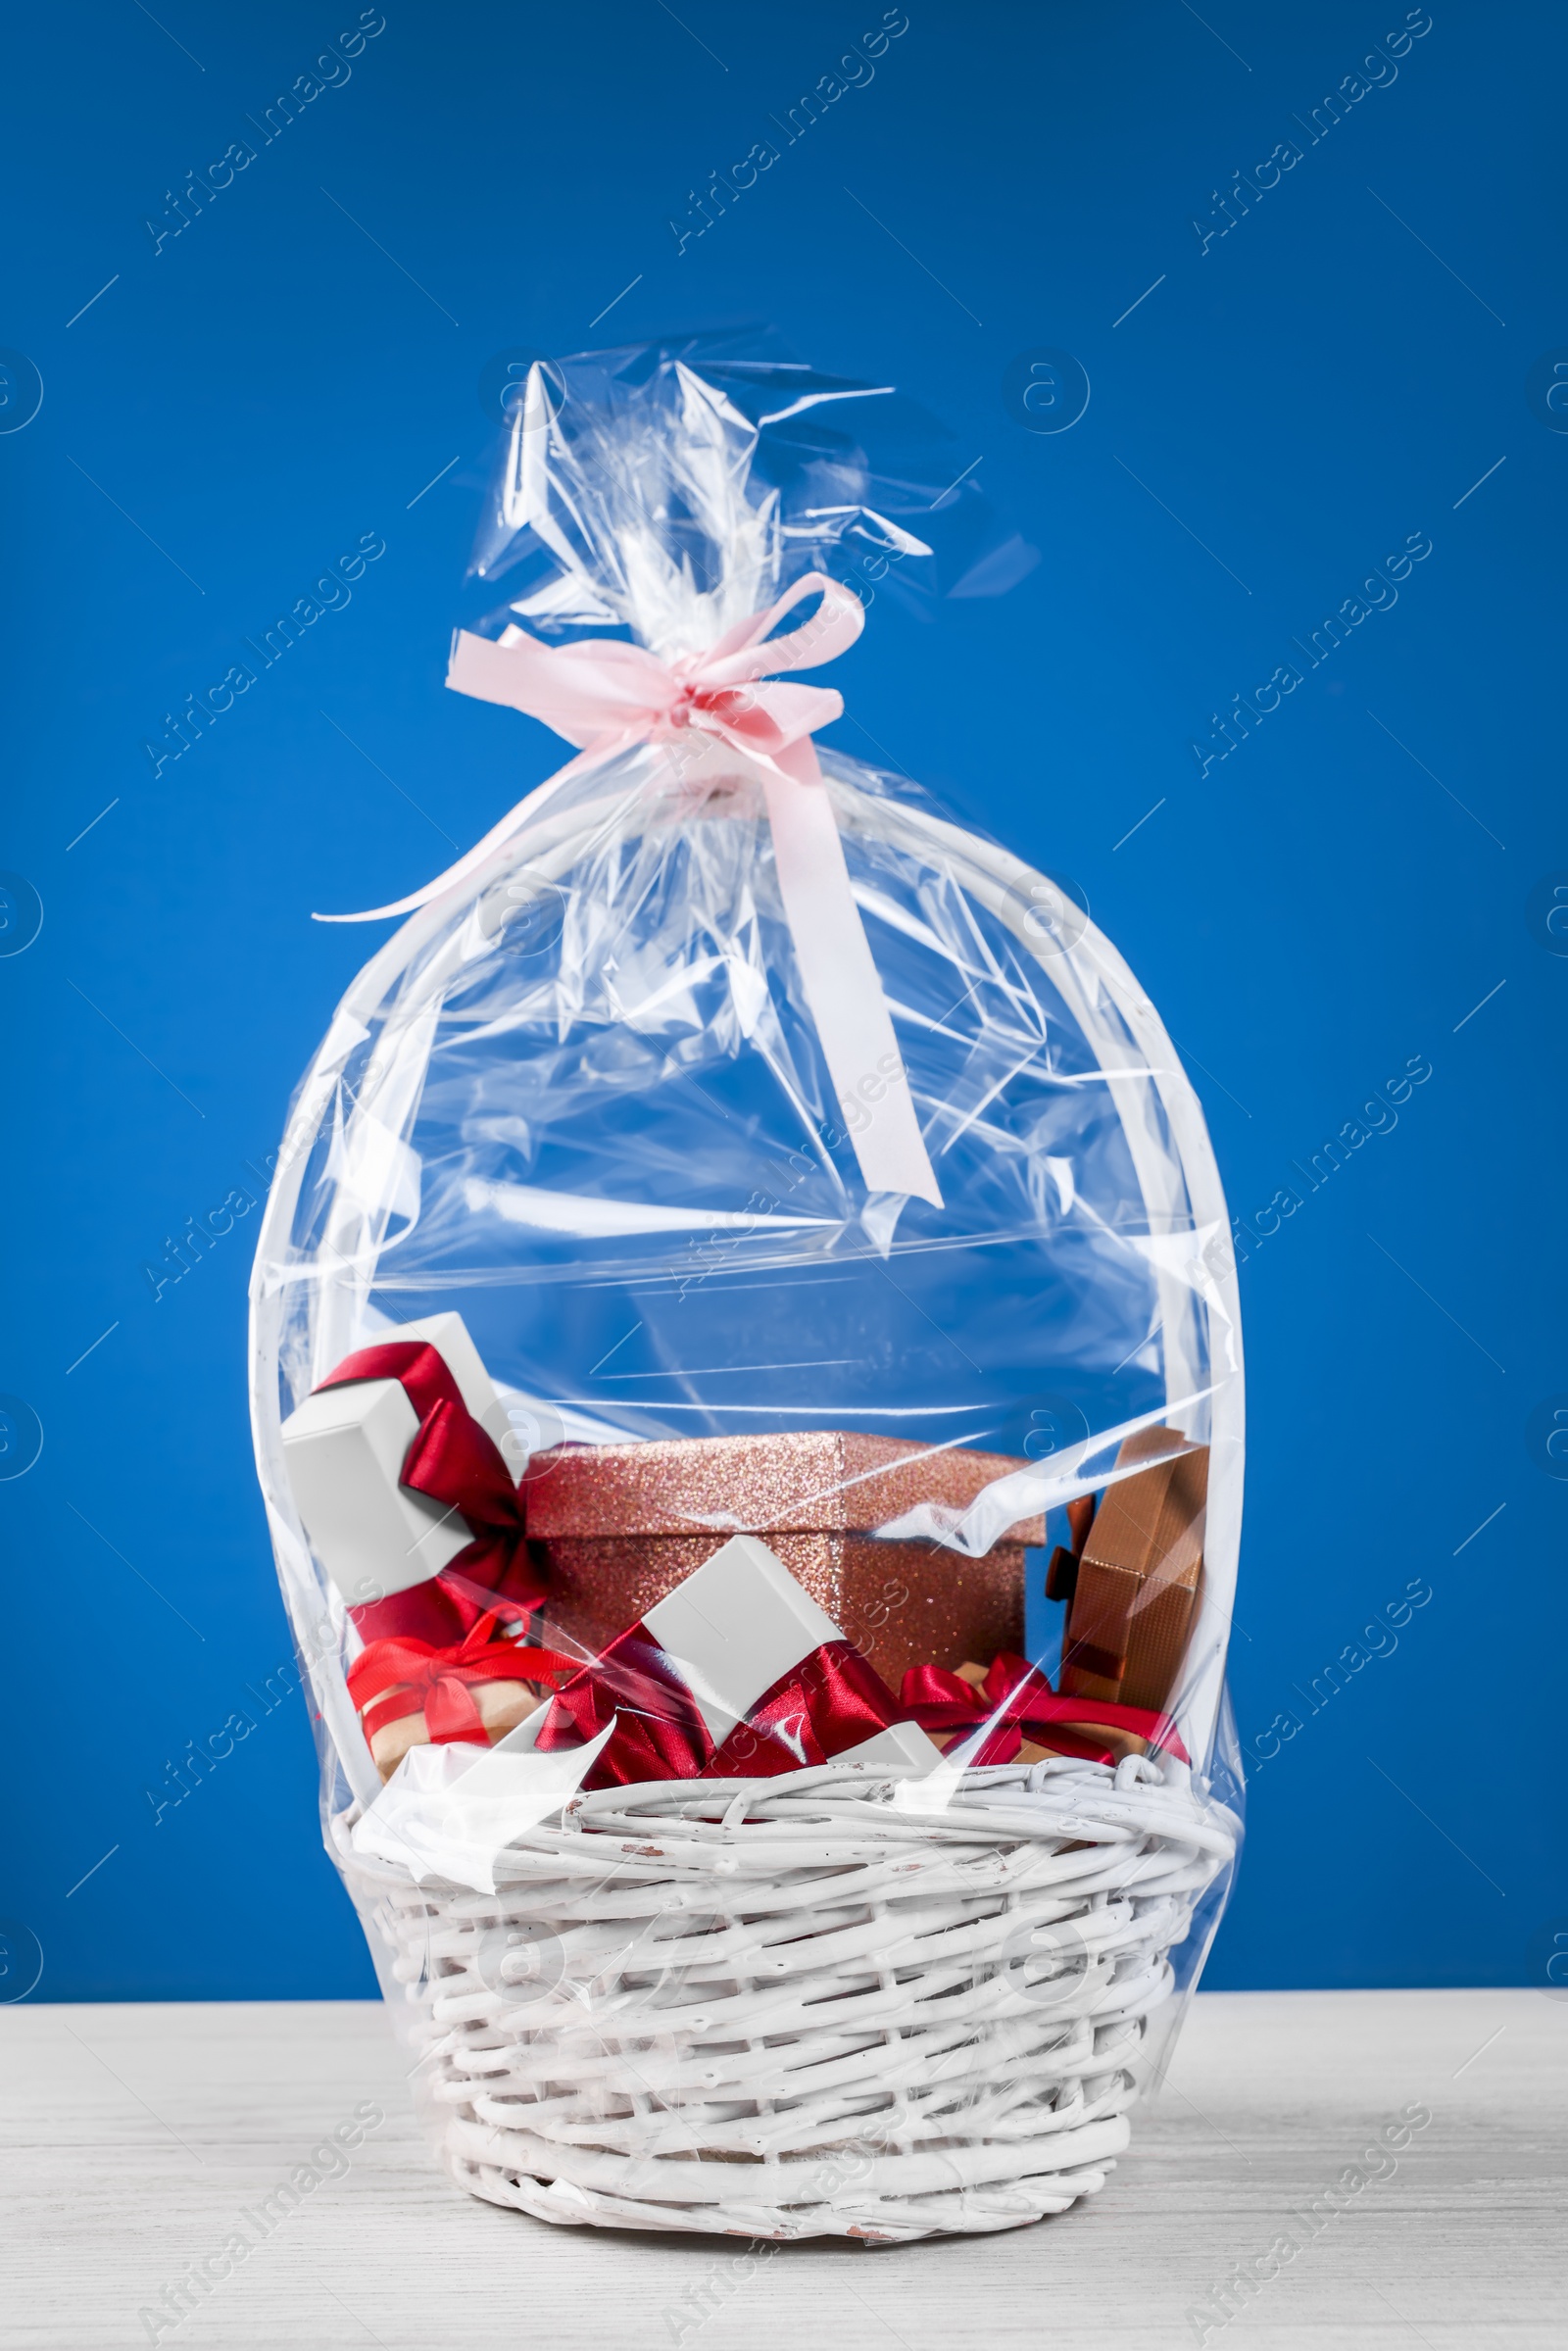 Photo of Wicker basket full of gift boxes on white wooden table against blue background